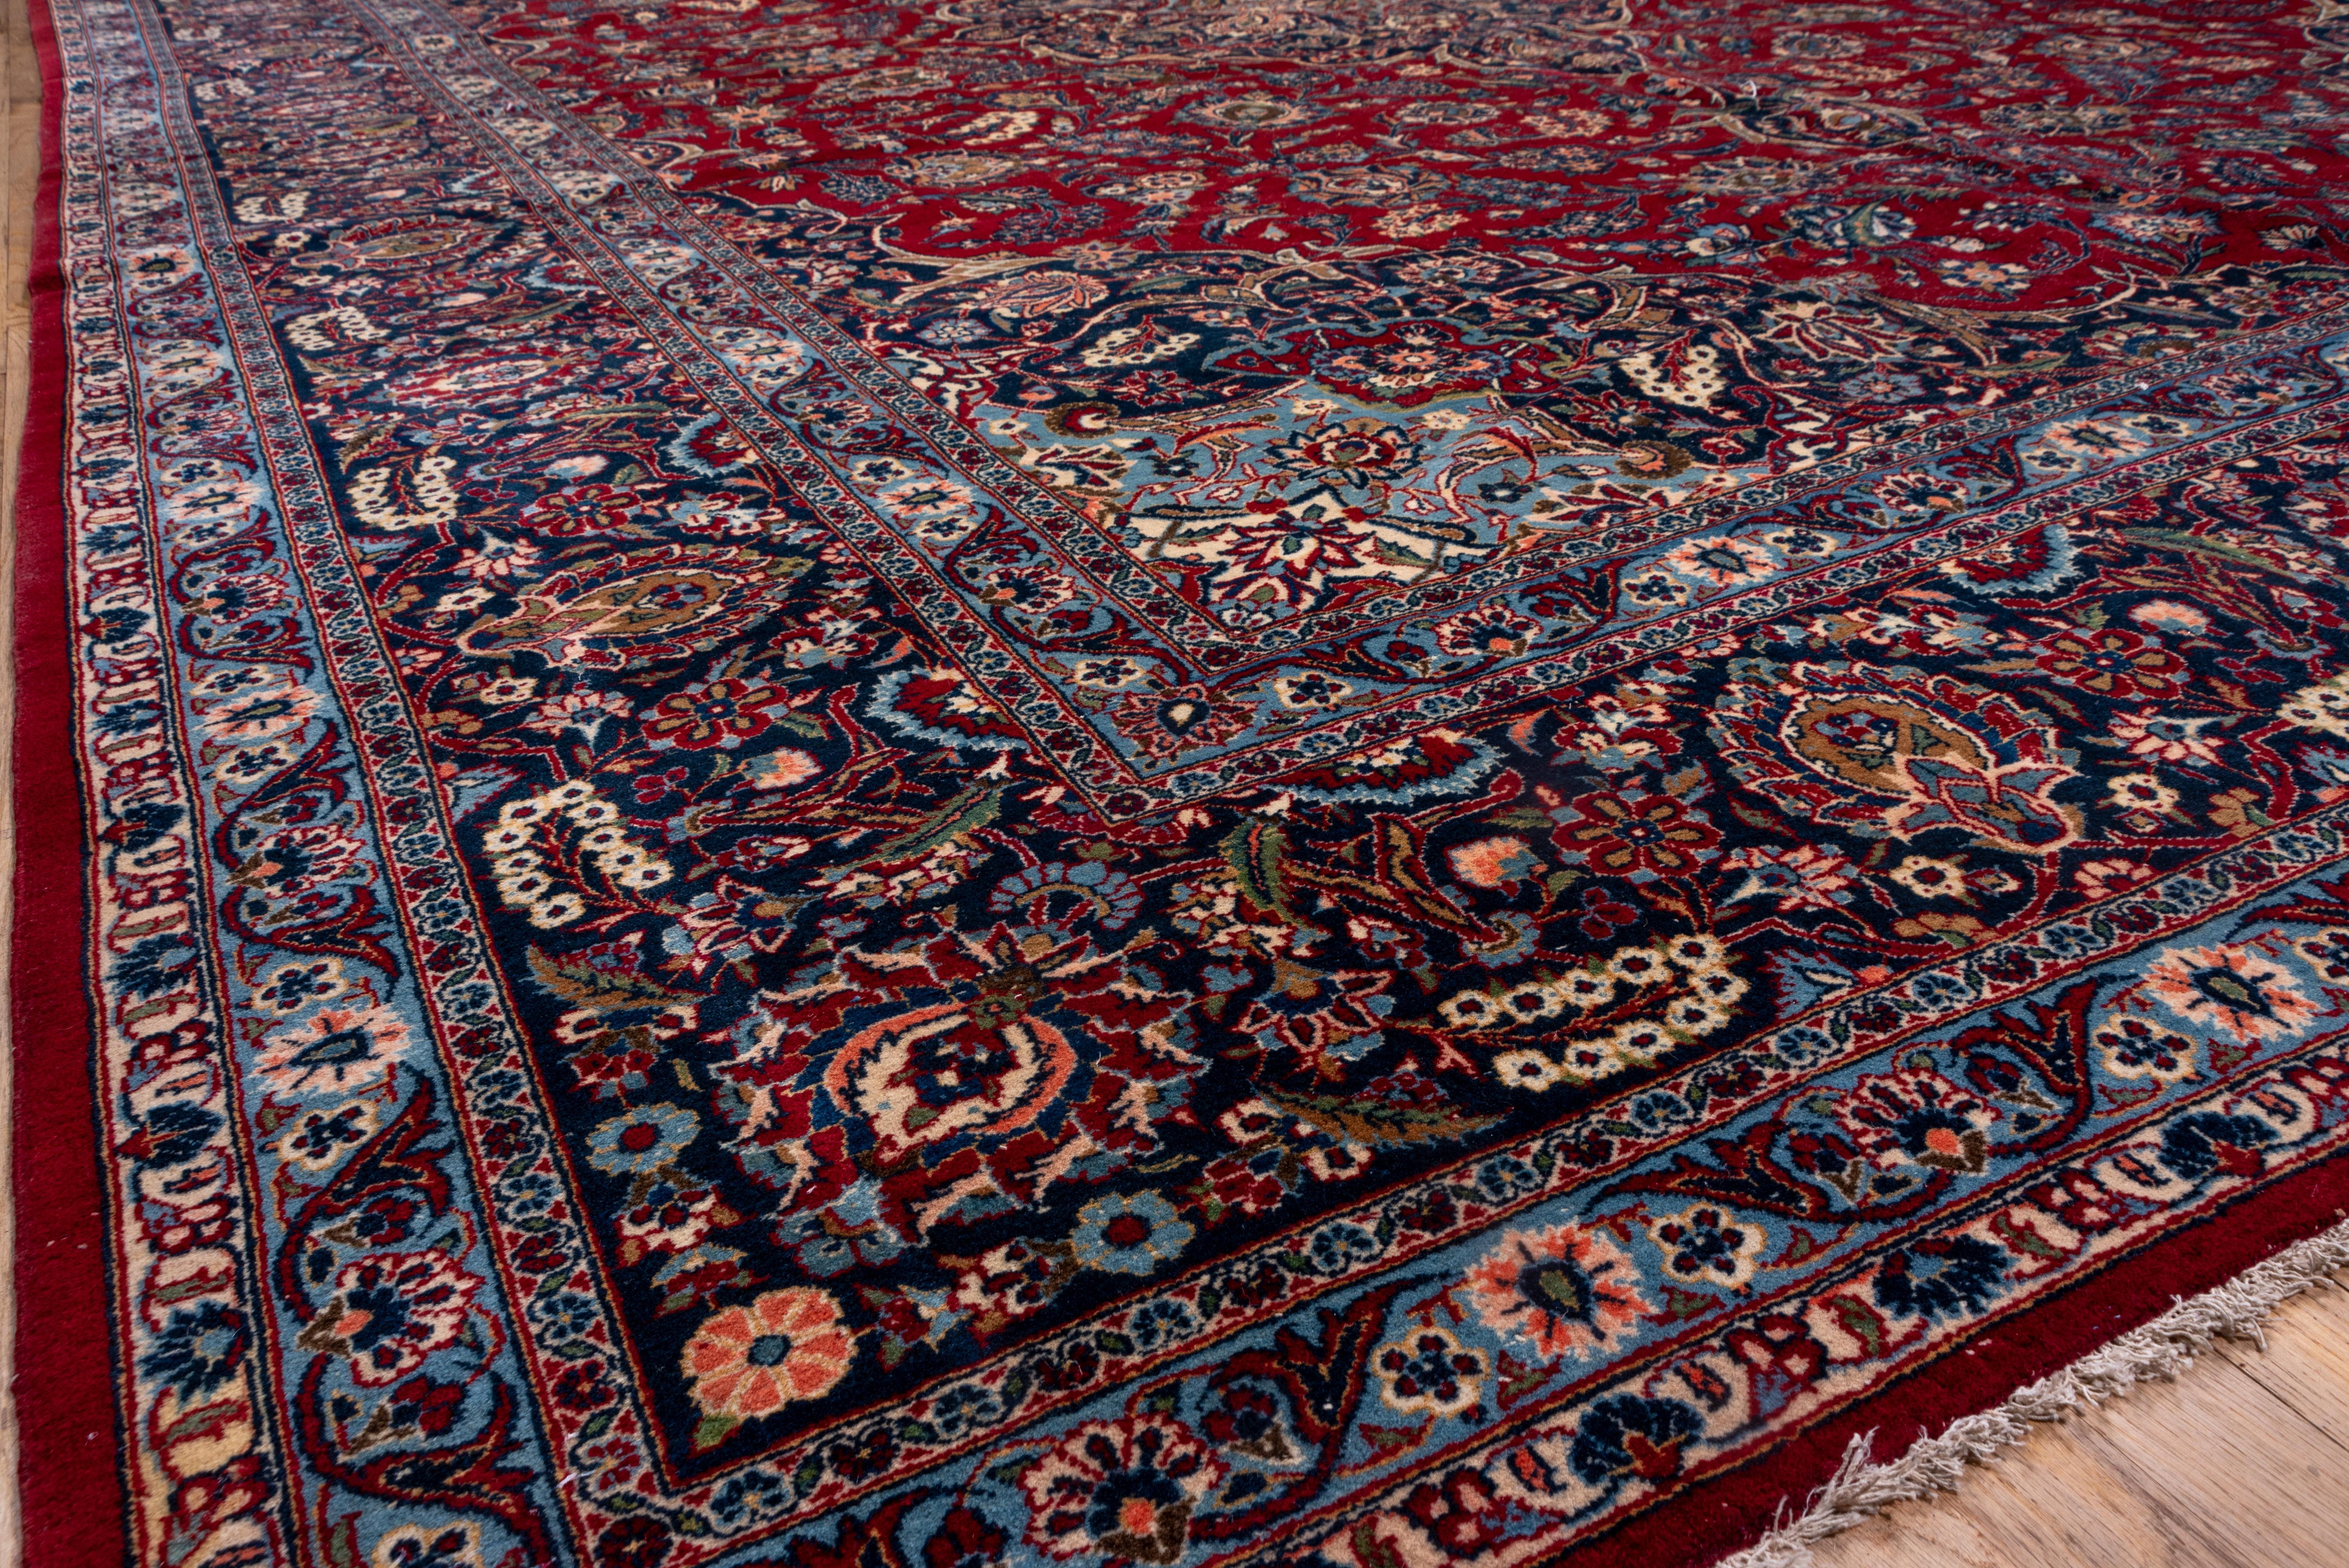 Classic red and navy central Persian town carpet with arabesque and acanthus-defined smaller medallion embedded in a complex array of palmettes, sickle leaves, and short racemes. Navy and cream corners. Royal/sapphire blue border with pointed oval